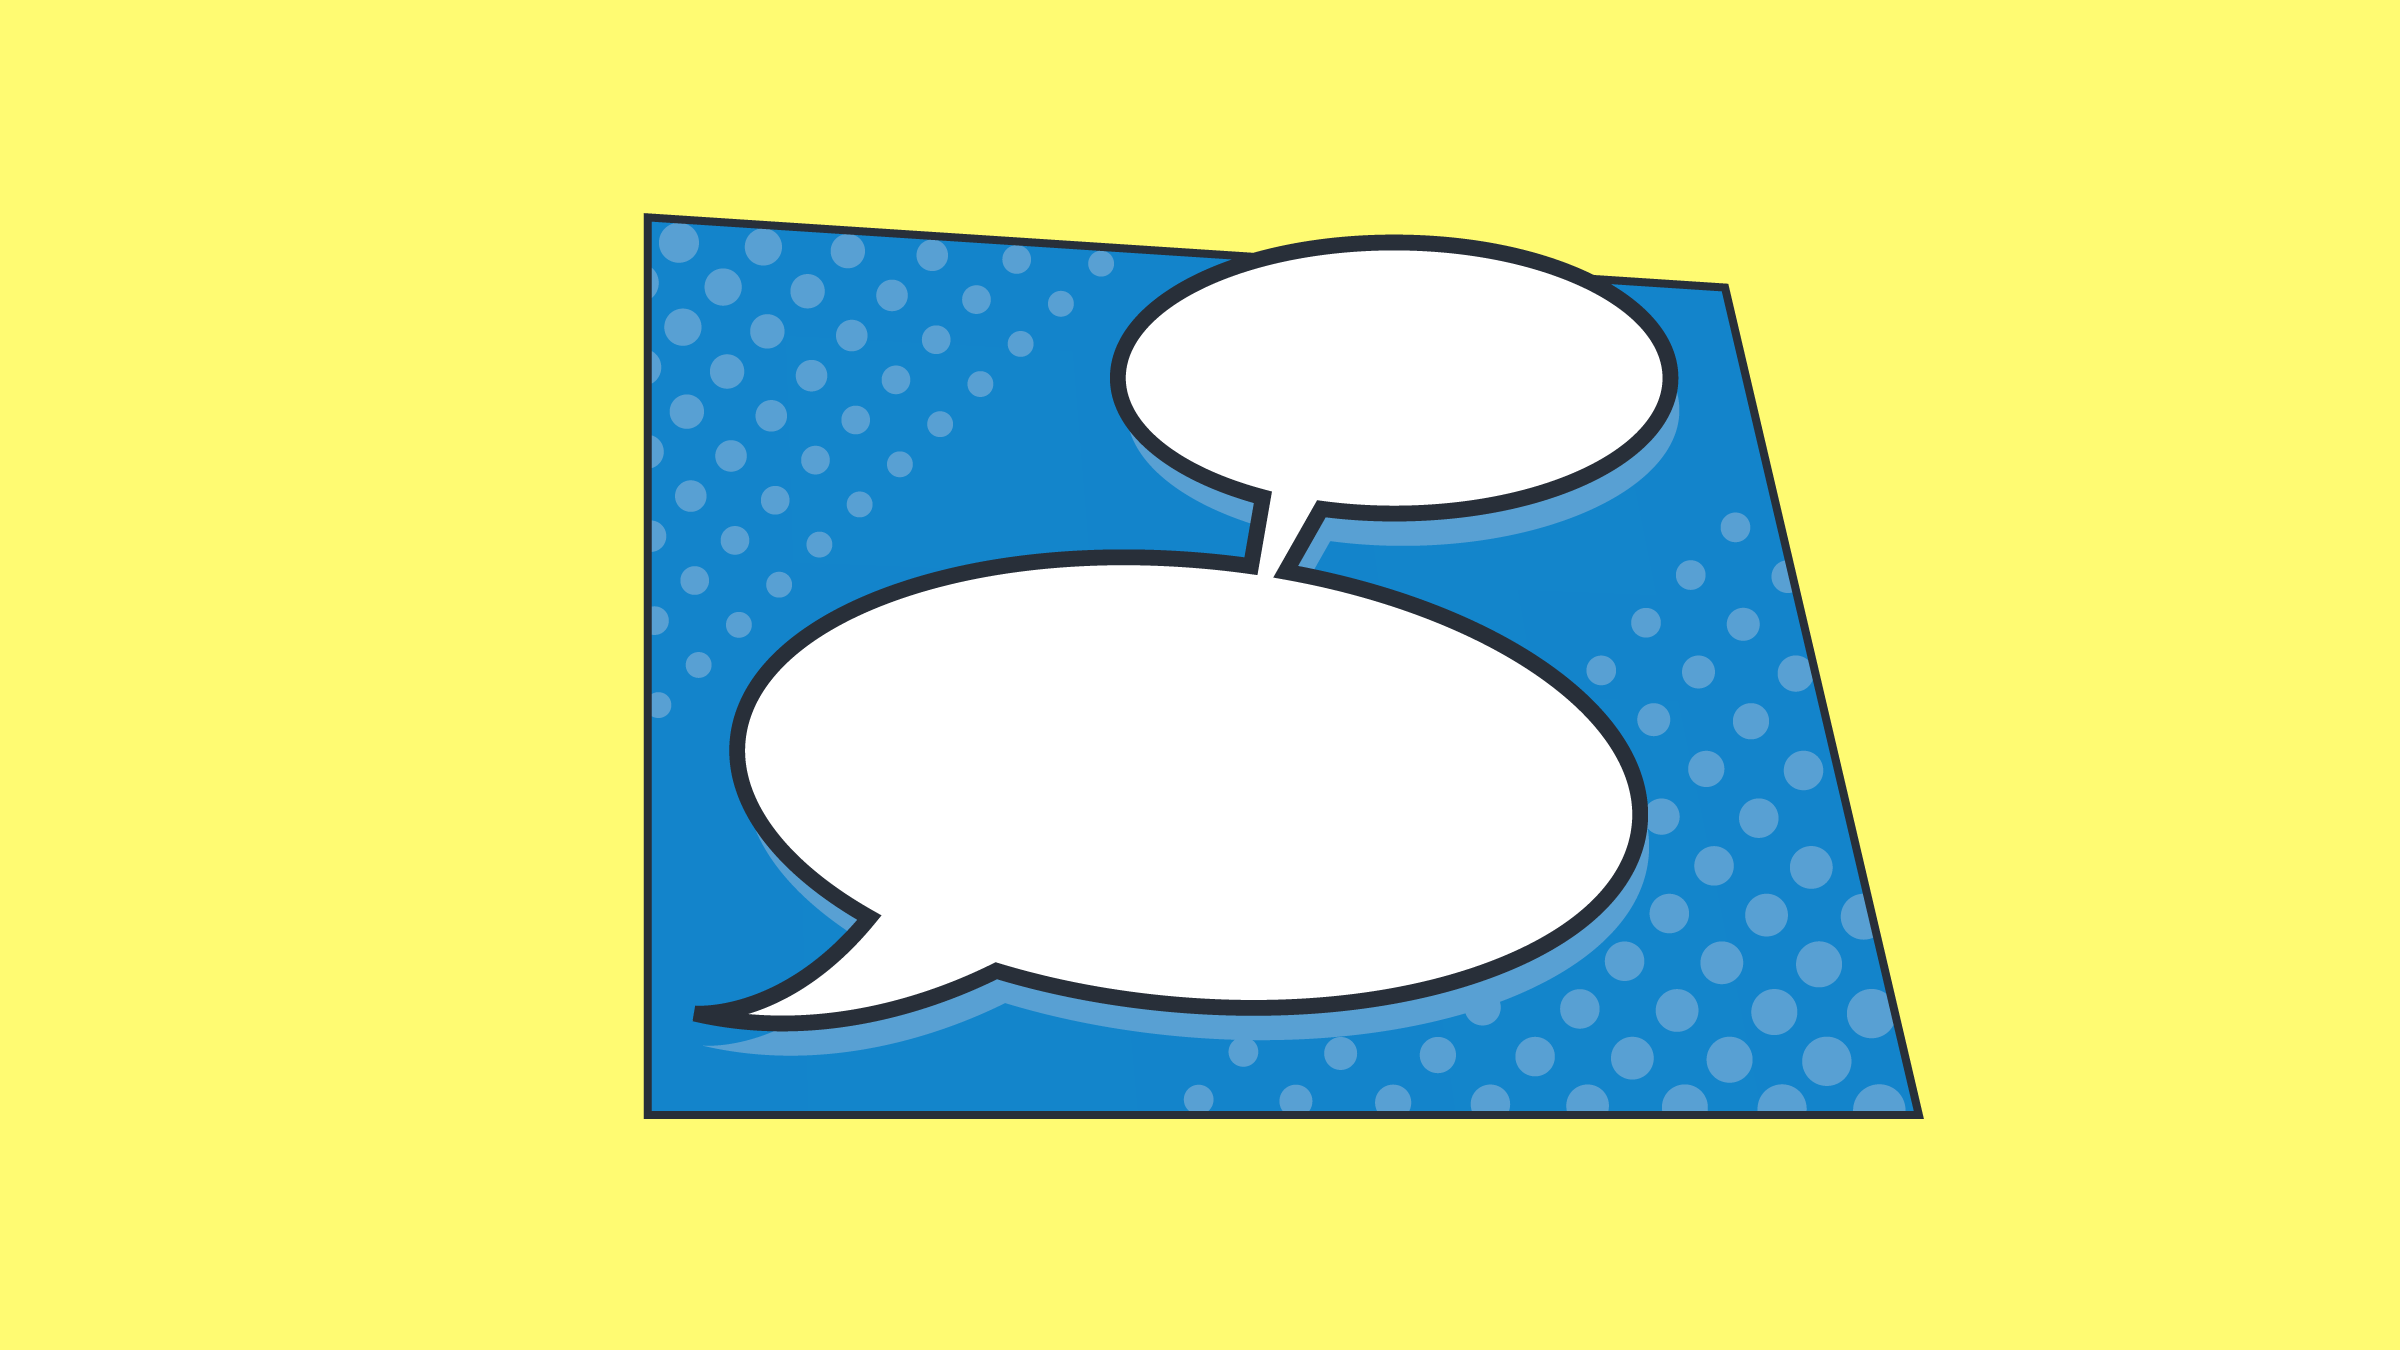 A speech bubble against a blue frame in comic style is set on a yellow background.